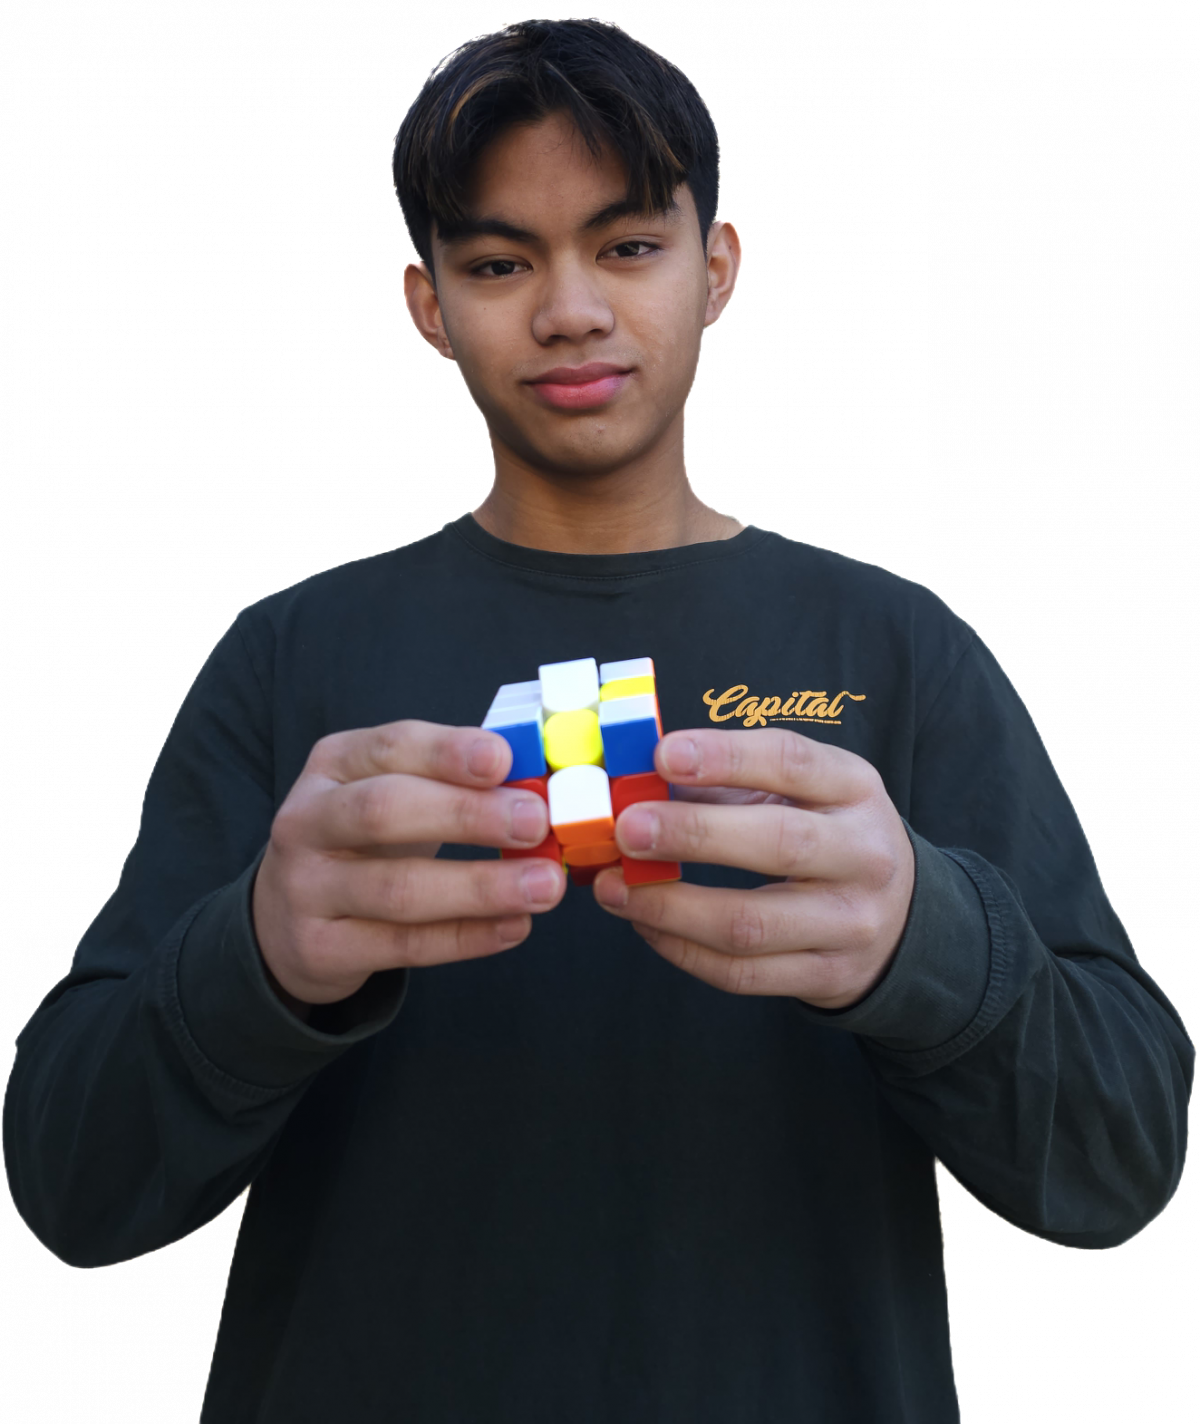 Tremendous opportunity to meet the world': Rubik's Cube champ, parents talk  with Mainichi - The Mainichi